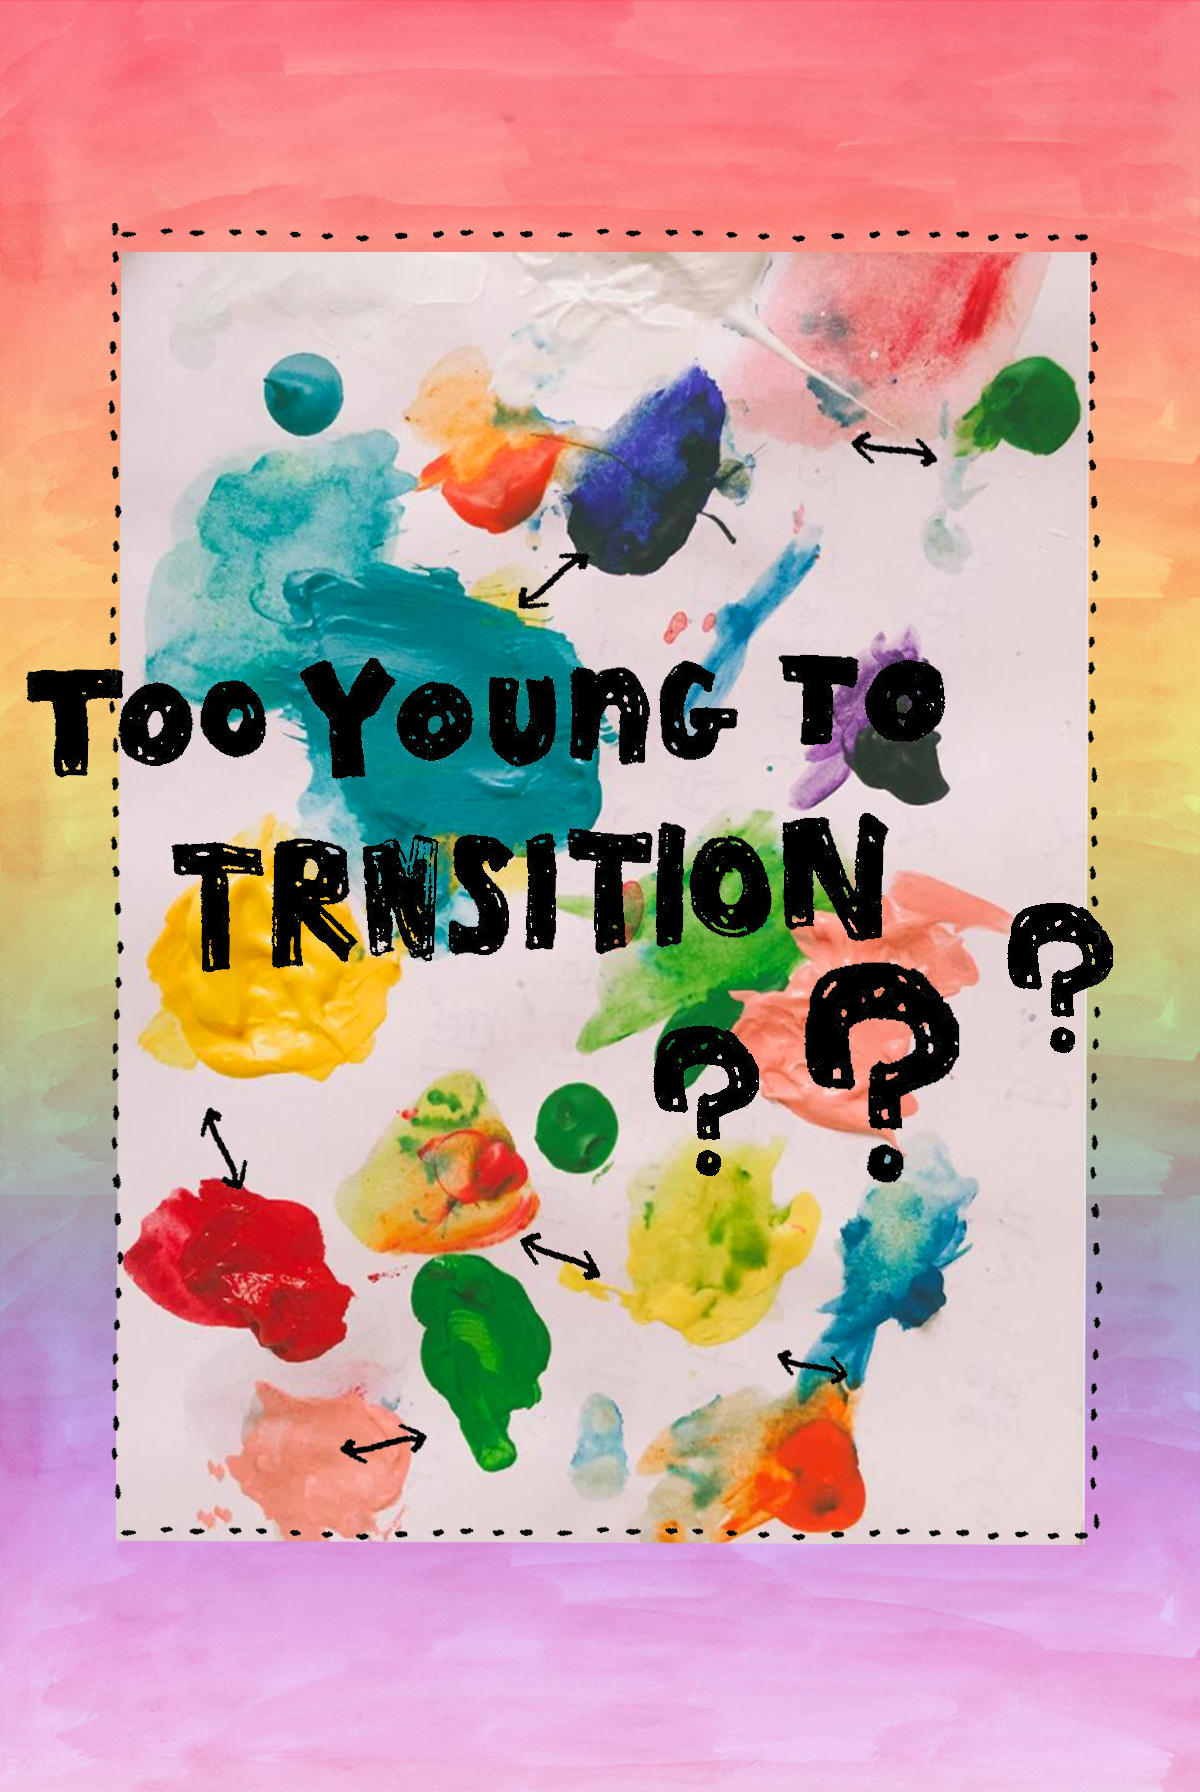 YEOJA Mag - Too Young To Transition: Gender Transition - Written by Izzy McLeod Artwork by Kiyono Saito